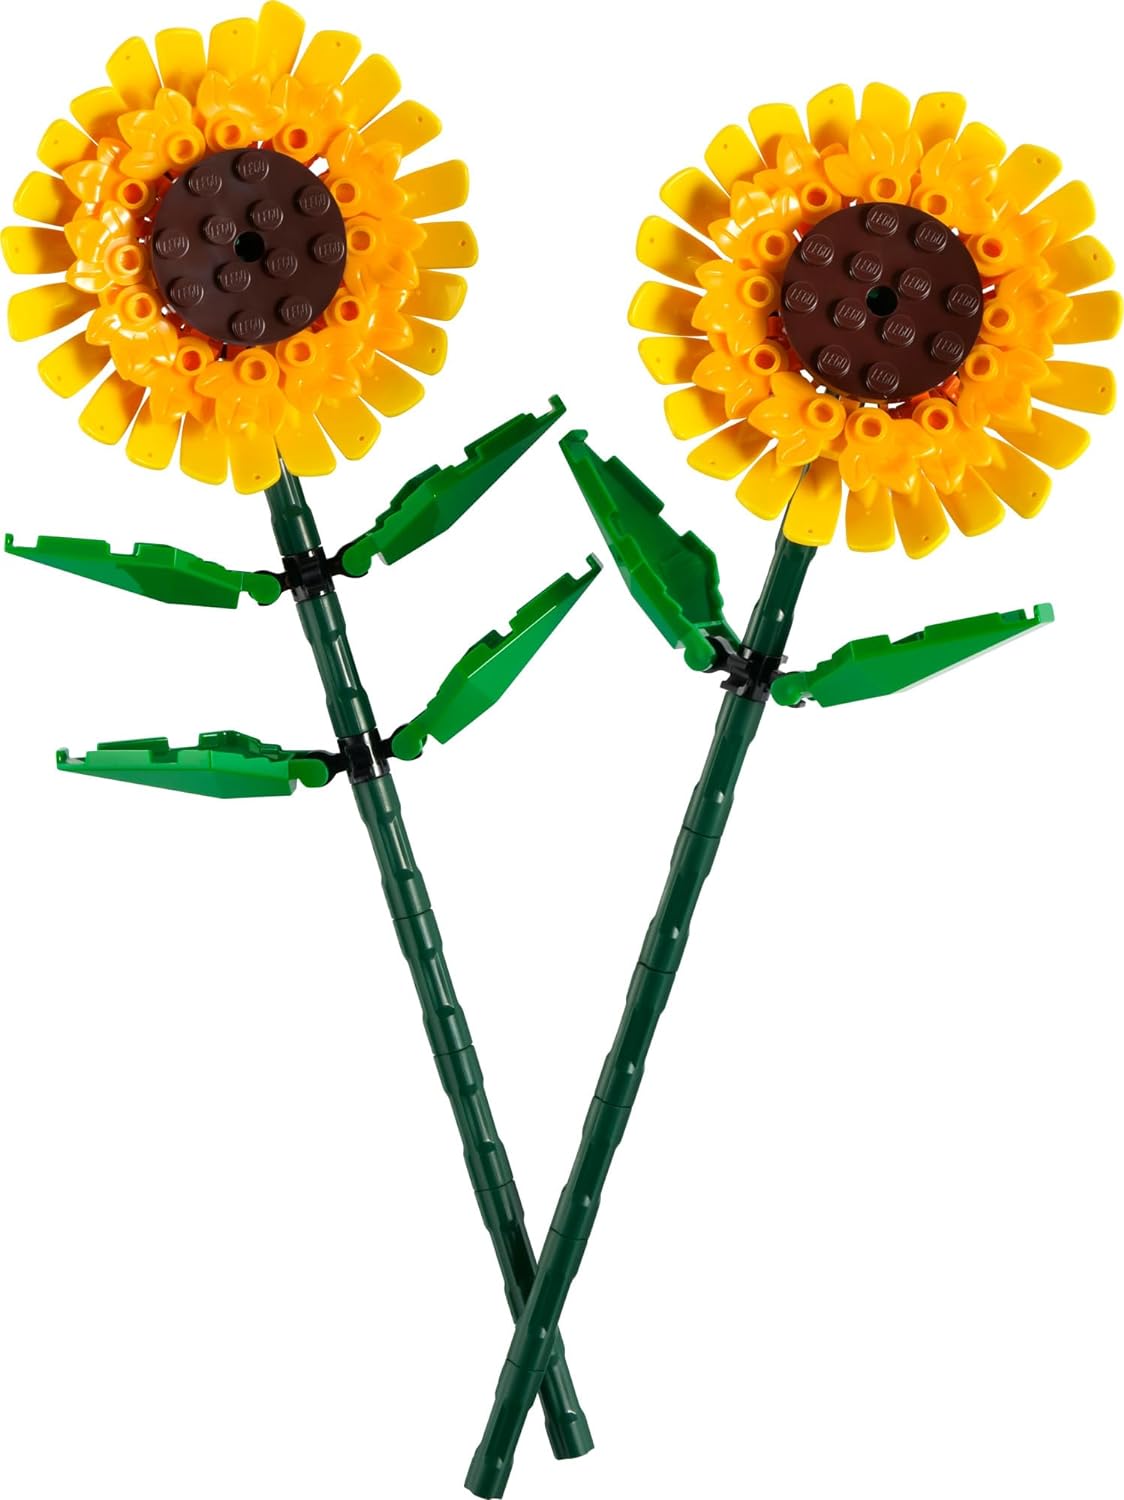 BOTANICAL COLLECTION 40524: Sunflowers